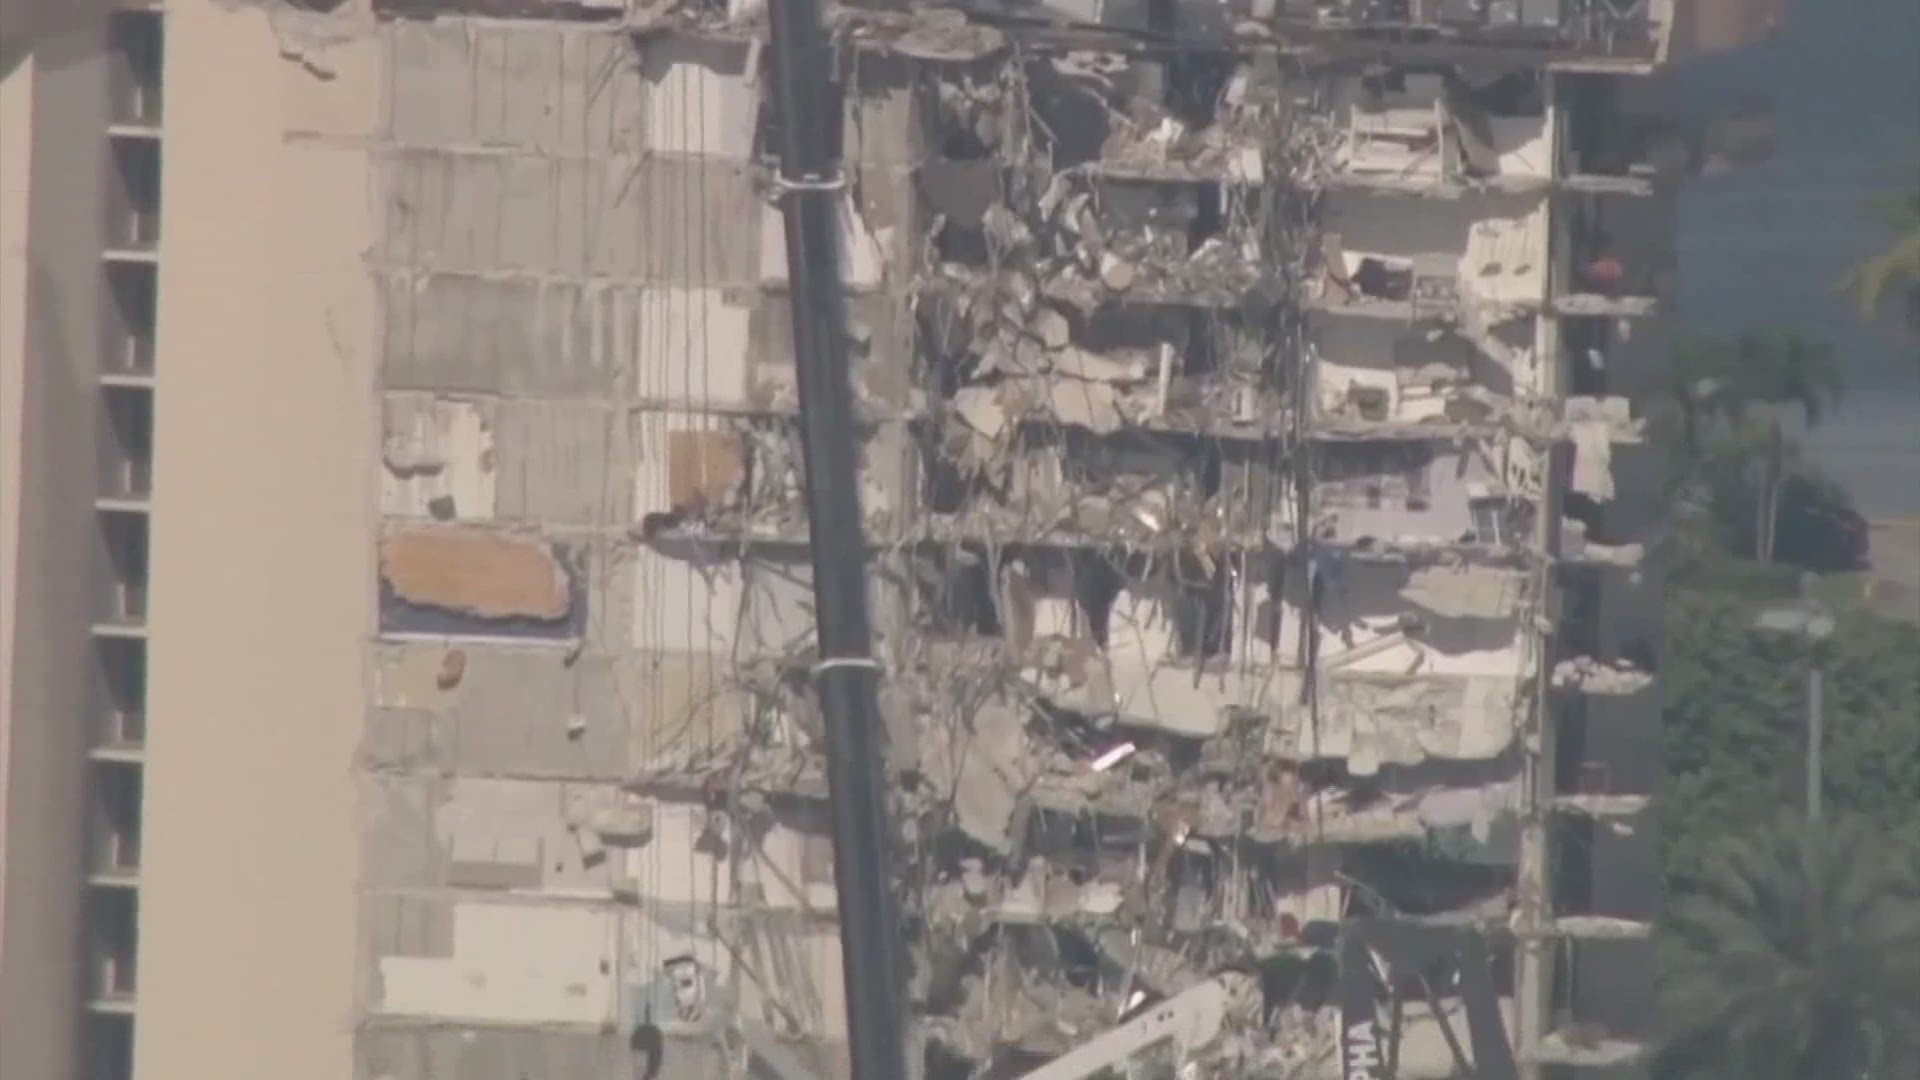 The new discovery brings the number of people still unaccounted for to 149 after part of a beachfront apartment building collapsed in Surfside, Florida.